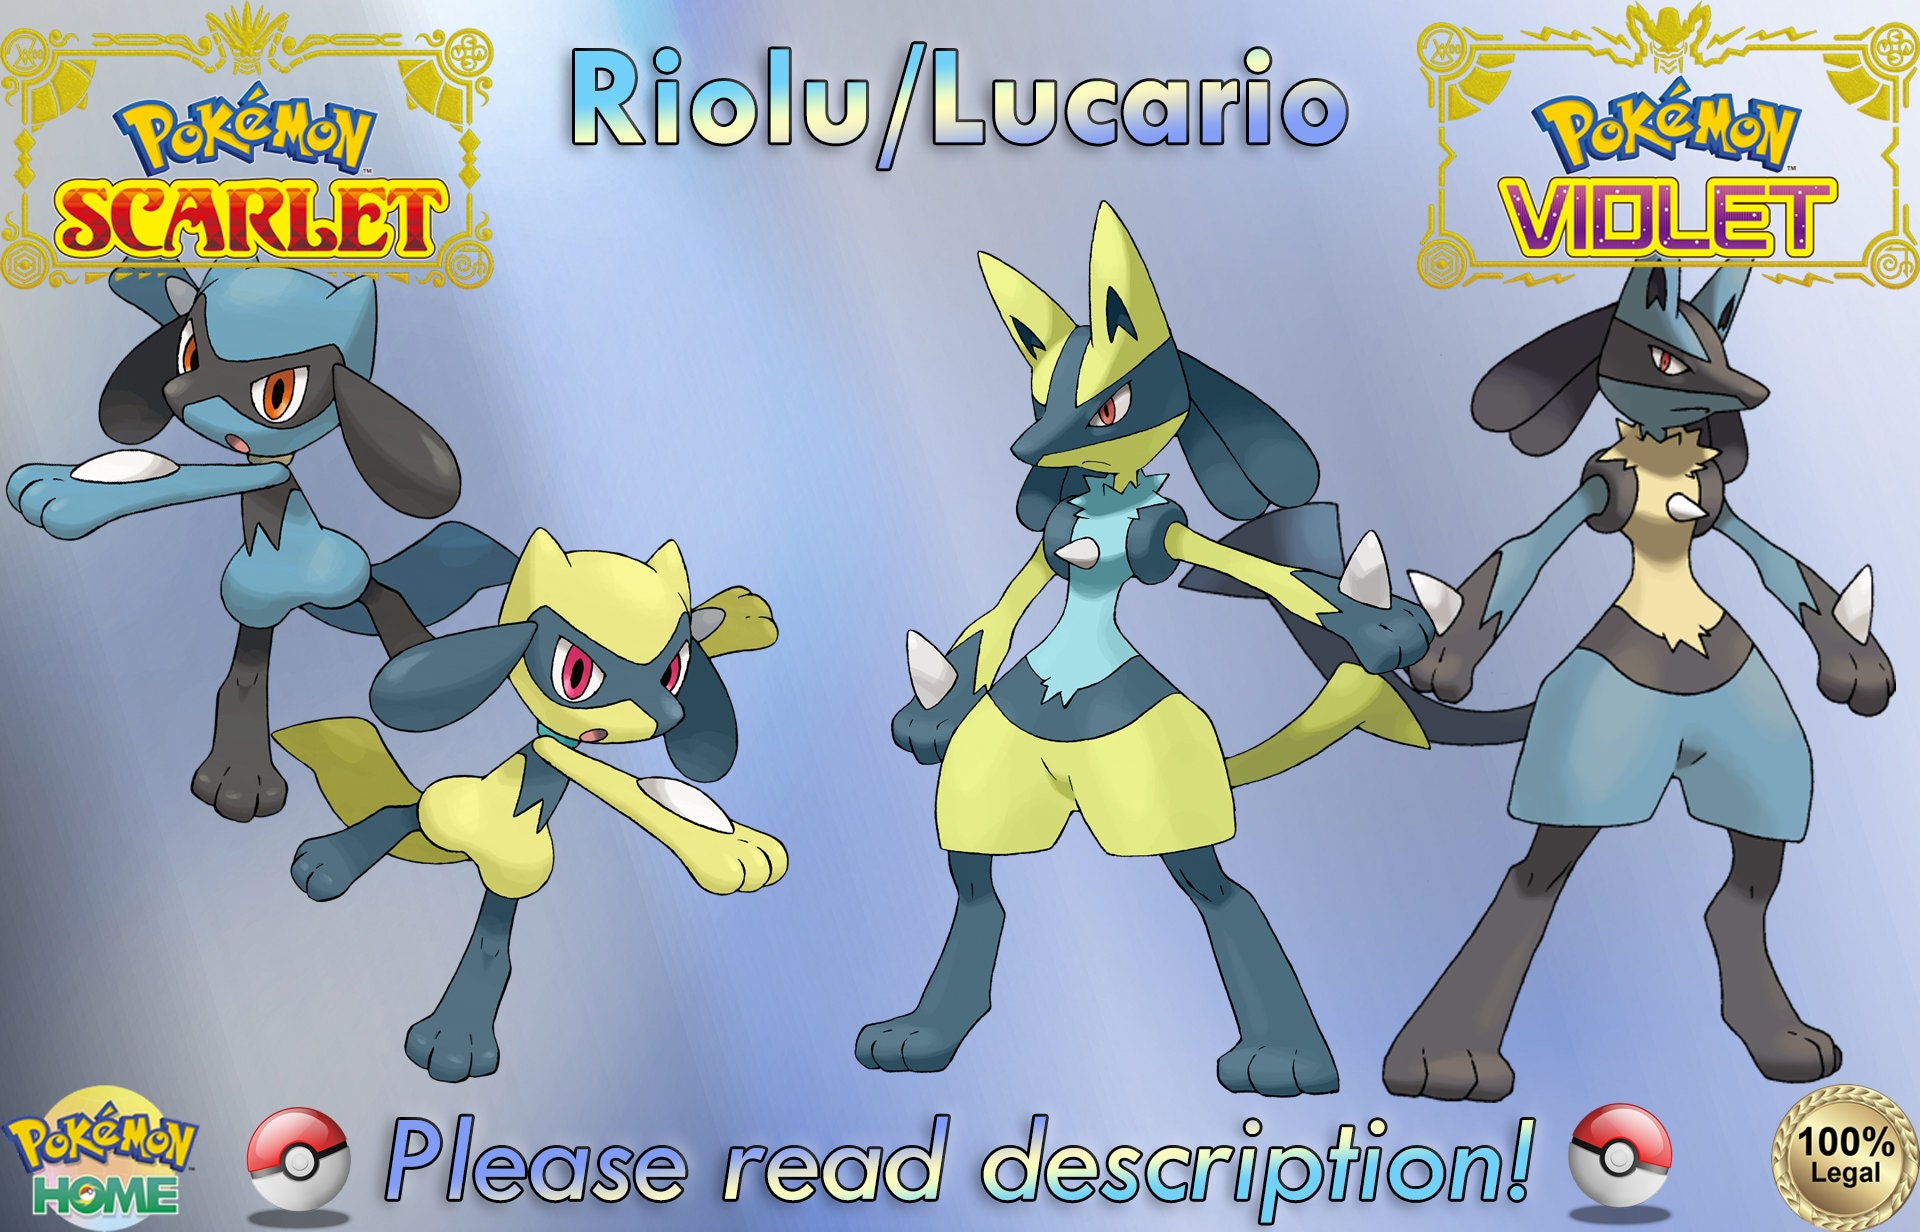 What Shiny Lucario Should Be : r/pokemon